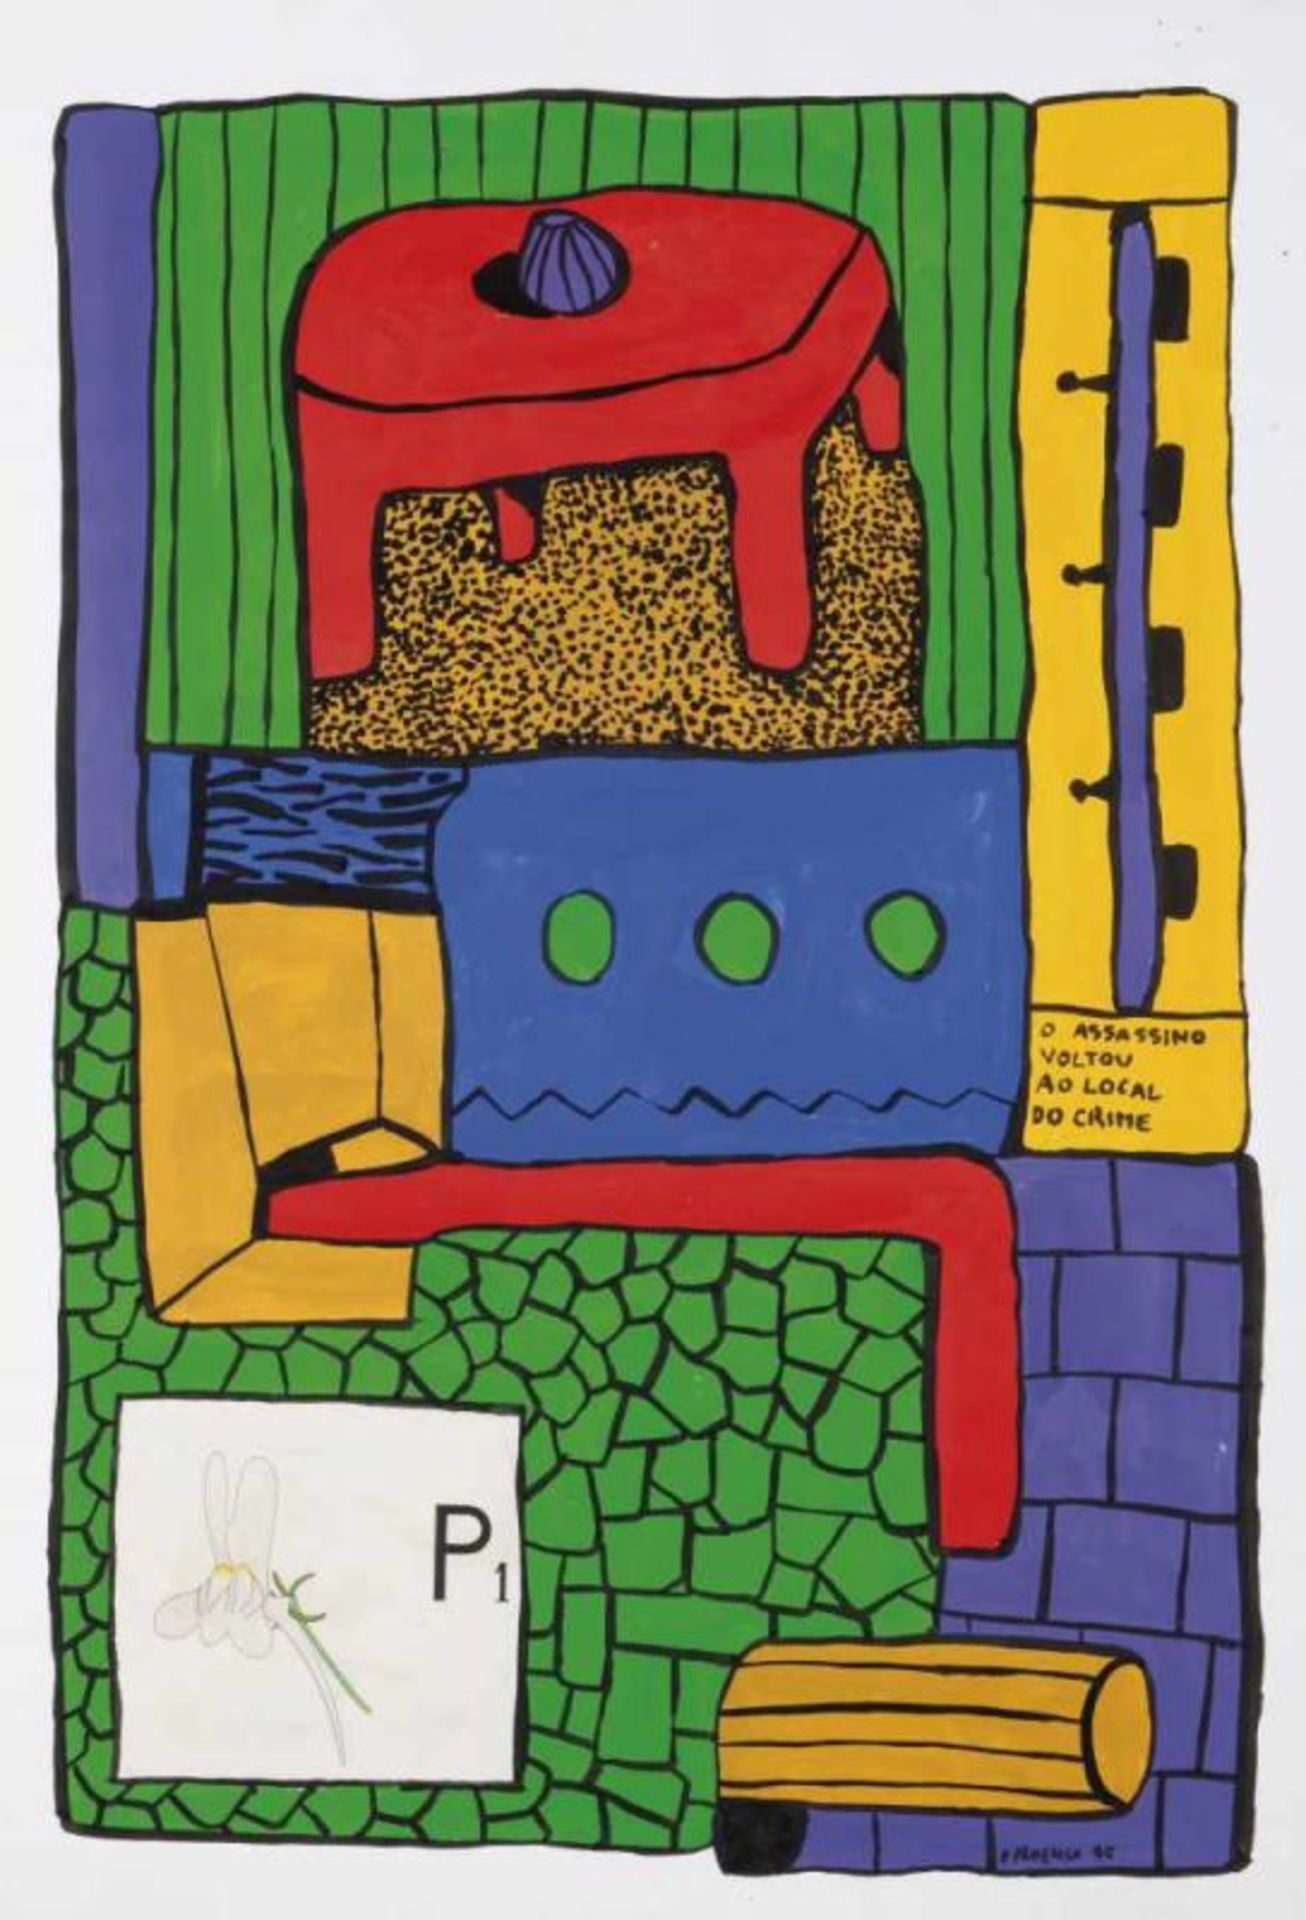 Pedro Proença (n. 1962)UntitledGouache and collage on paperSigned and dated 9599x69 cm